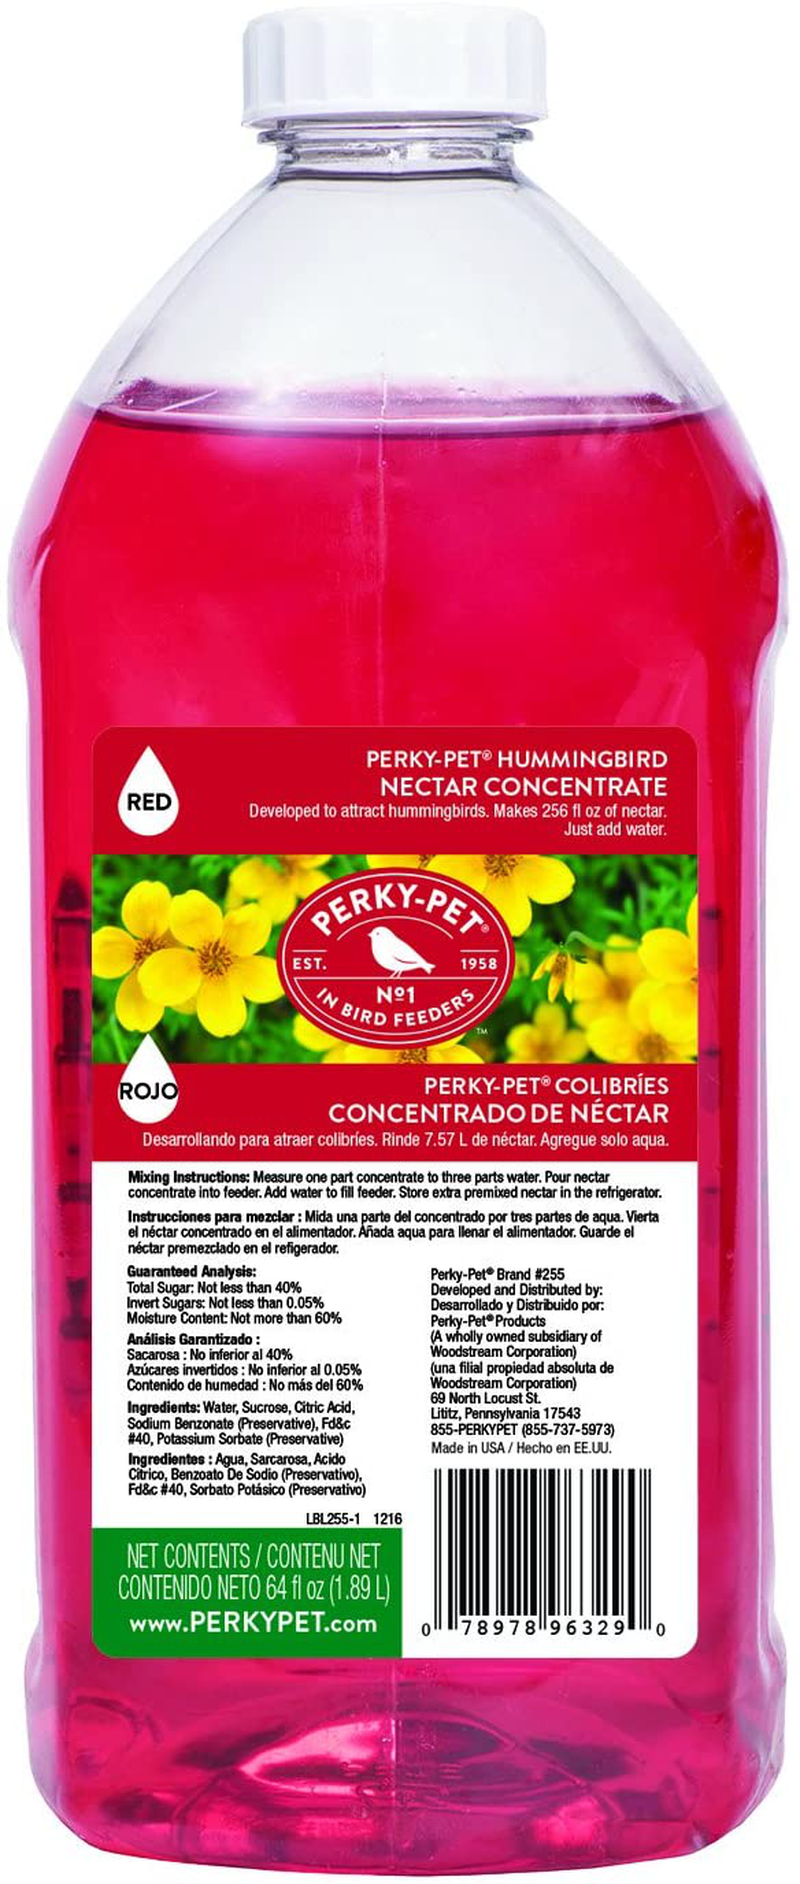 Perky-Pet 247 Red Hummingbird Nectar Concentrate, 16-Ounce , Brown